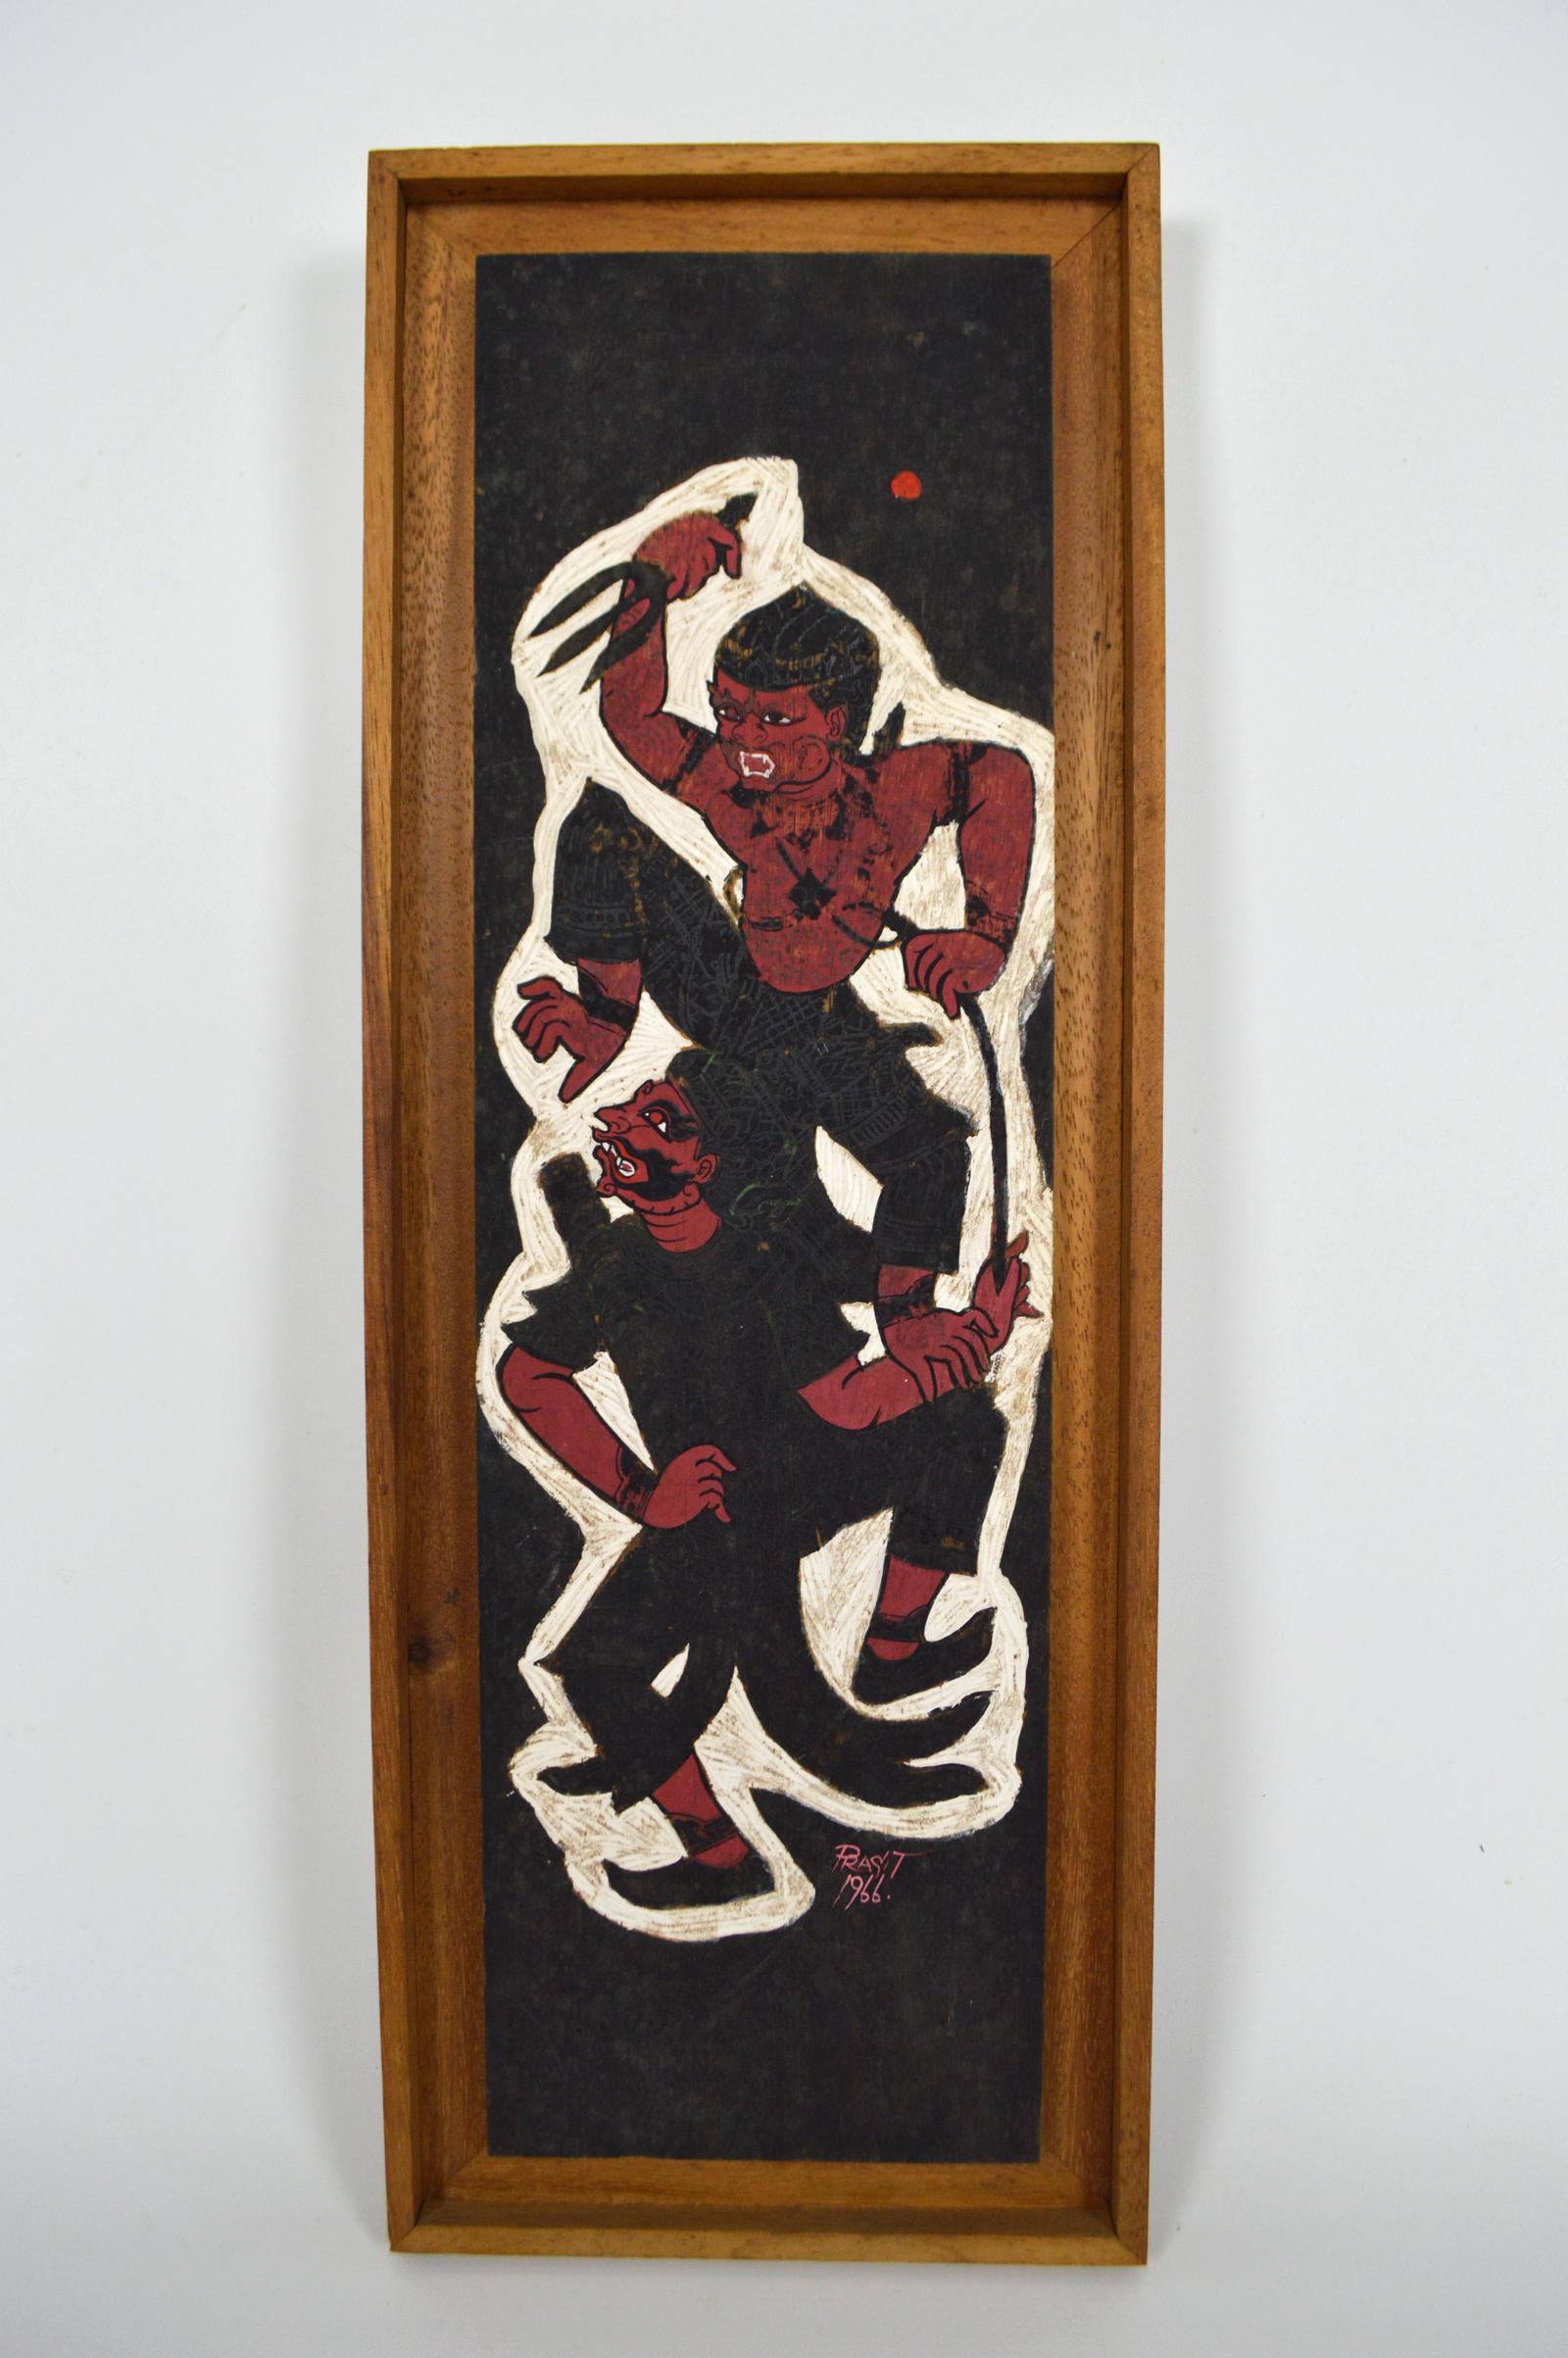 Wooden panel painted in black, red and white tones.
The painting represents a Hindu mythological scene: we see Hanuman, the Monkey God, fighting against a demon.

Signed and dated: 